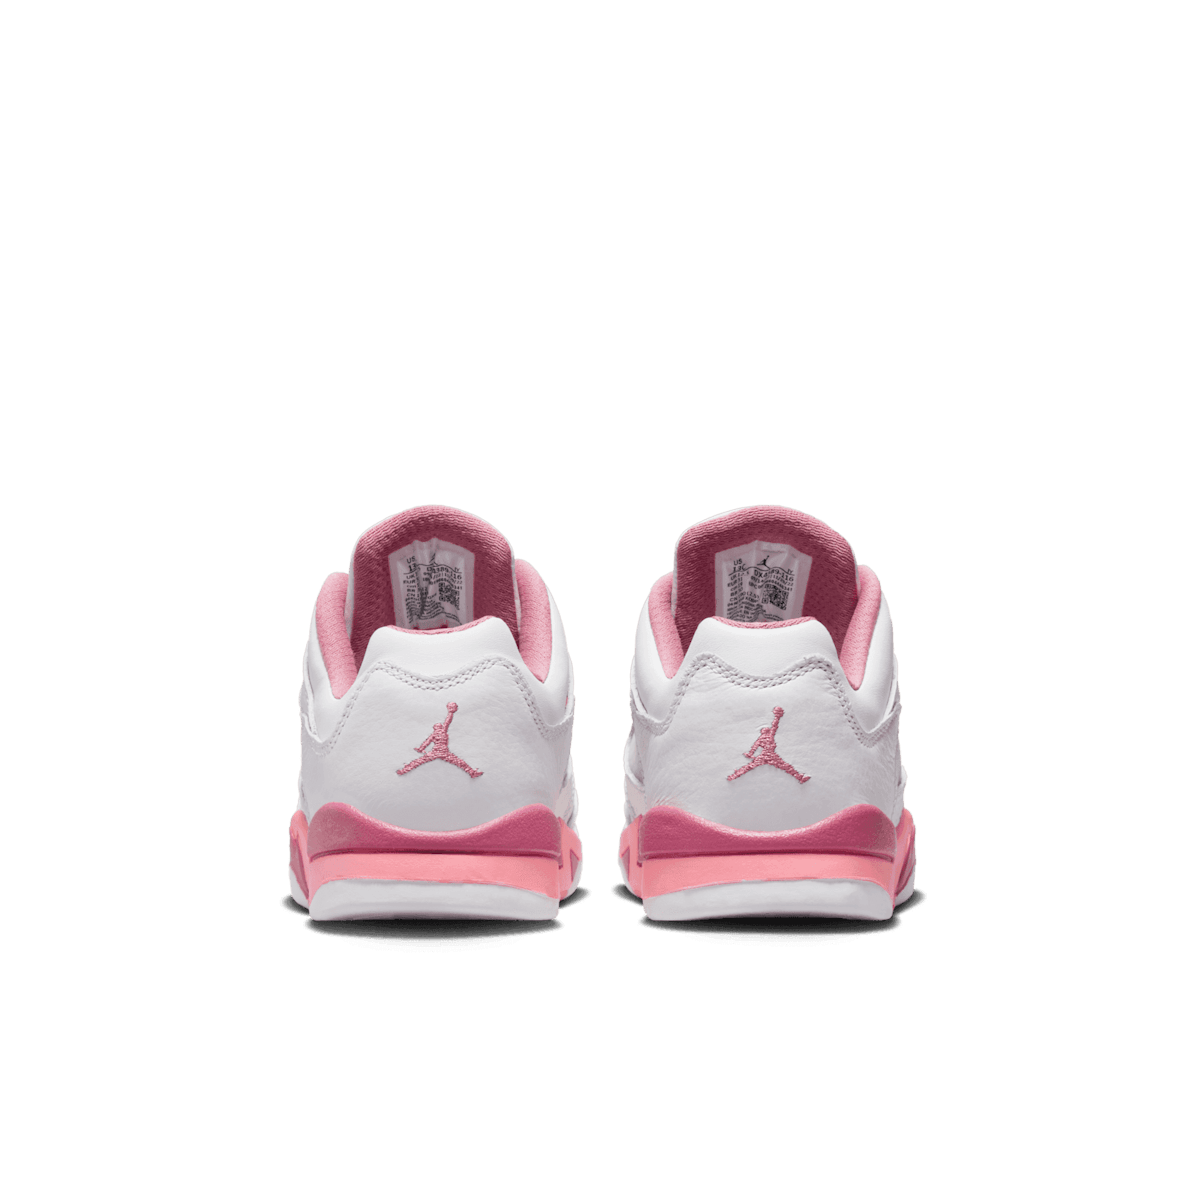 Air Jordan 5 Retro Low Crafted For Her (PS) Angle 3